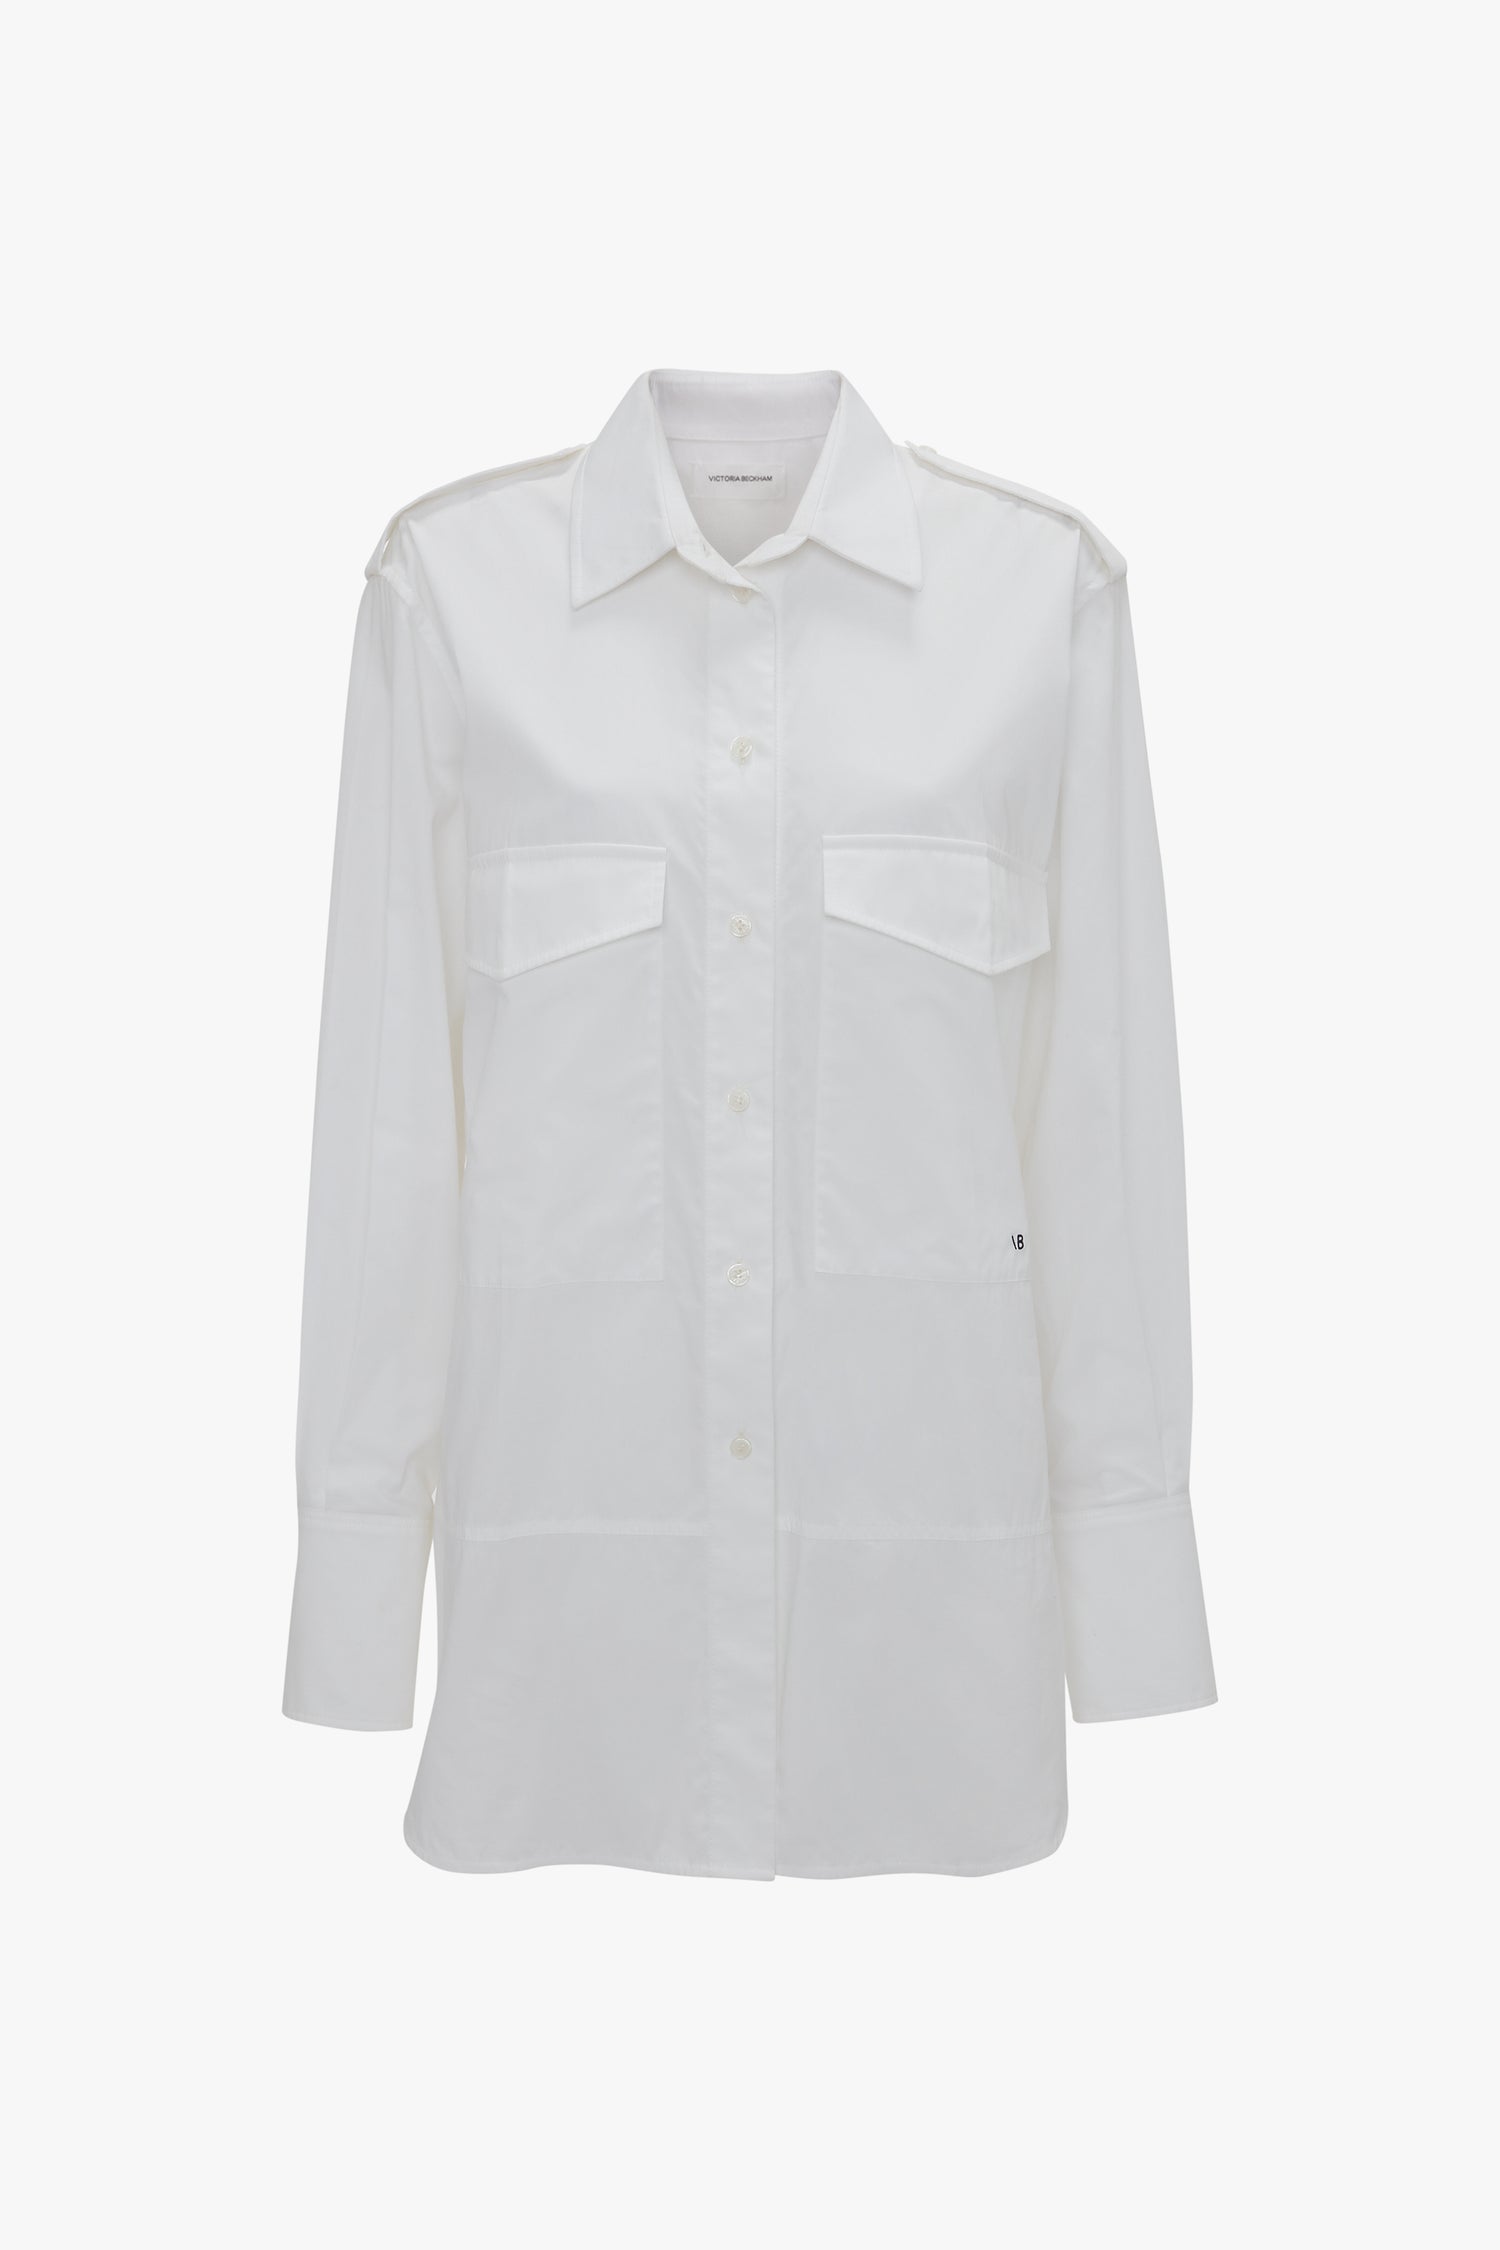 A long-sleeved white button-up Oversized Pocket Shirt In White by Victoria Beckham with two front chest pockets, crafted from organic cotton and displayed against a white background, exudes modern sophistication.